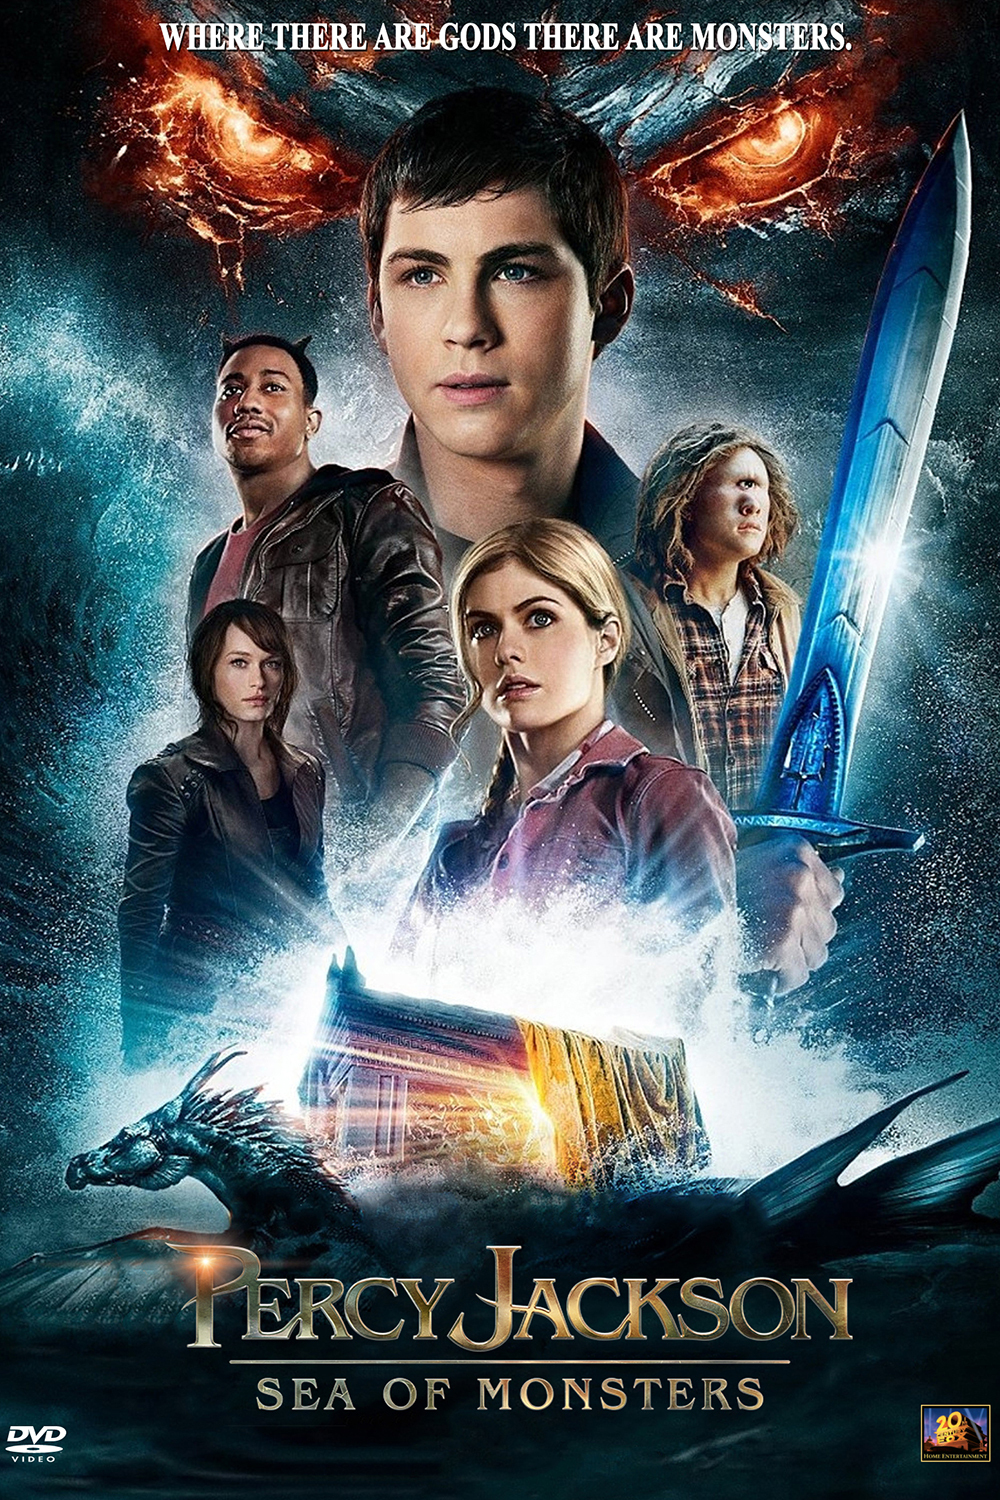 Percy Jackson: Sea of Monsters DVD Release Date | Redbox, Netflix